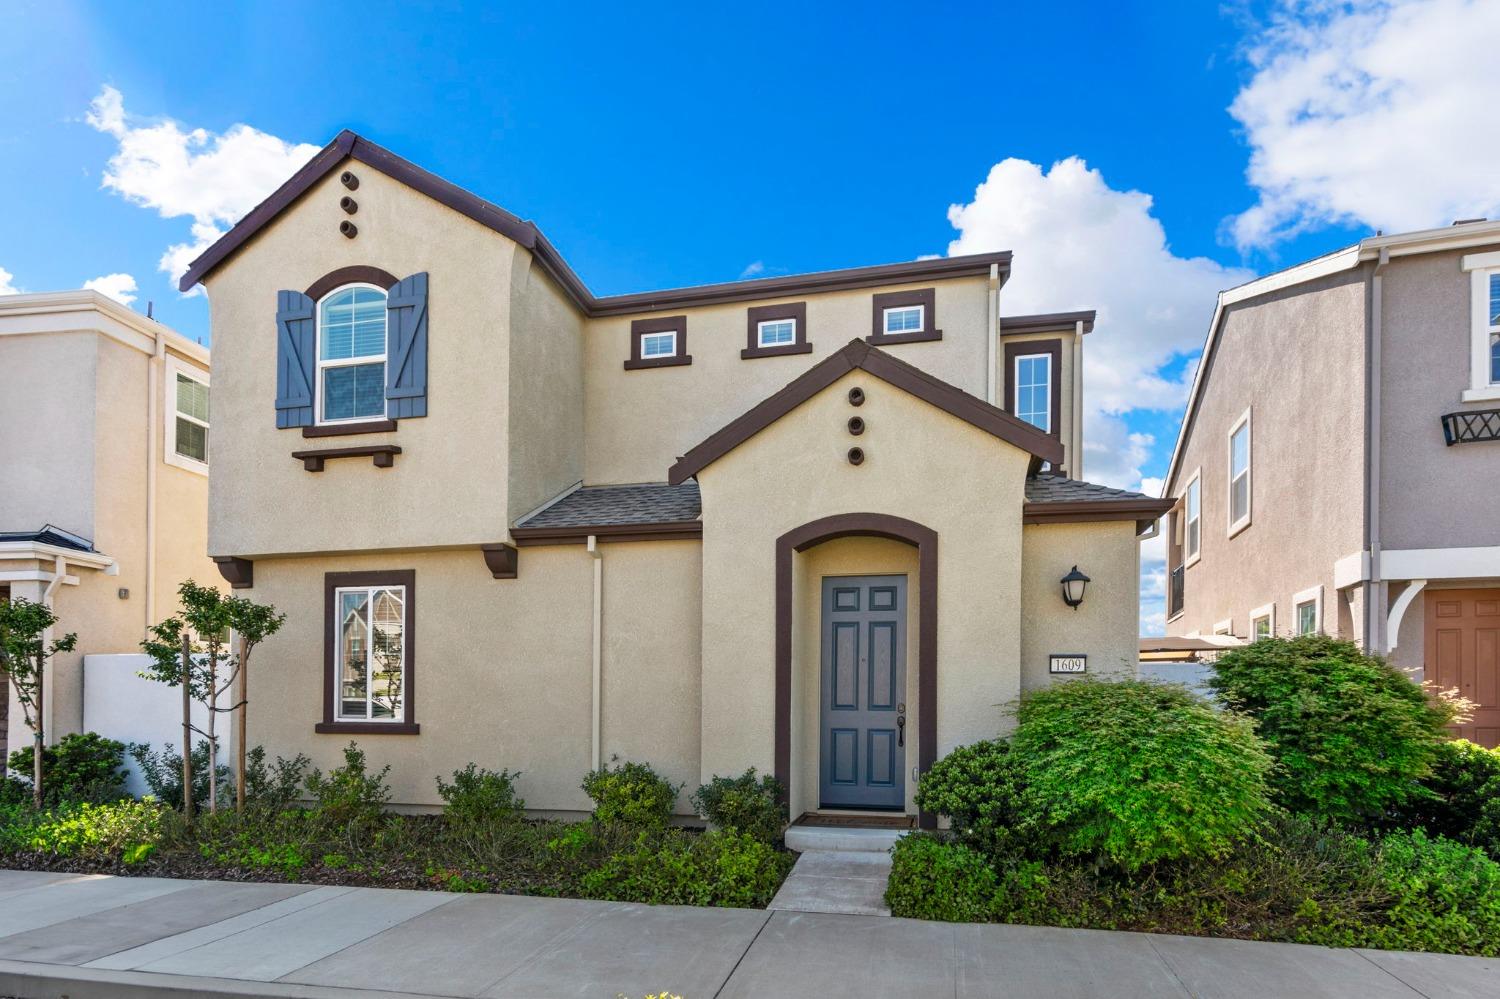 Photo of 1609 Parkside Wy in Roseville, CA